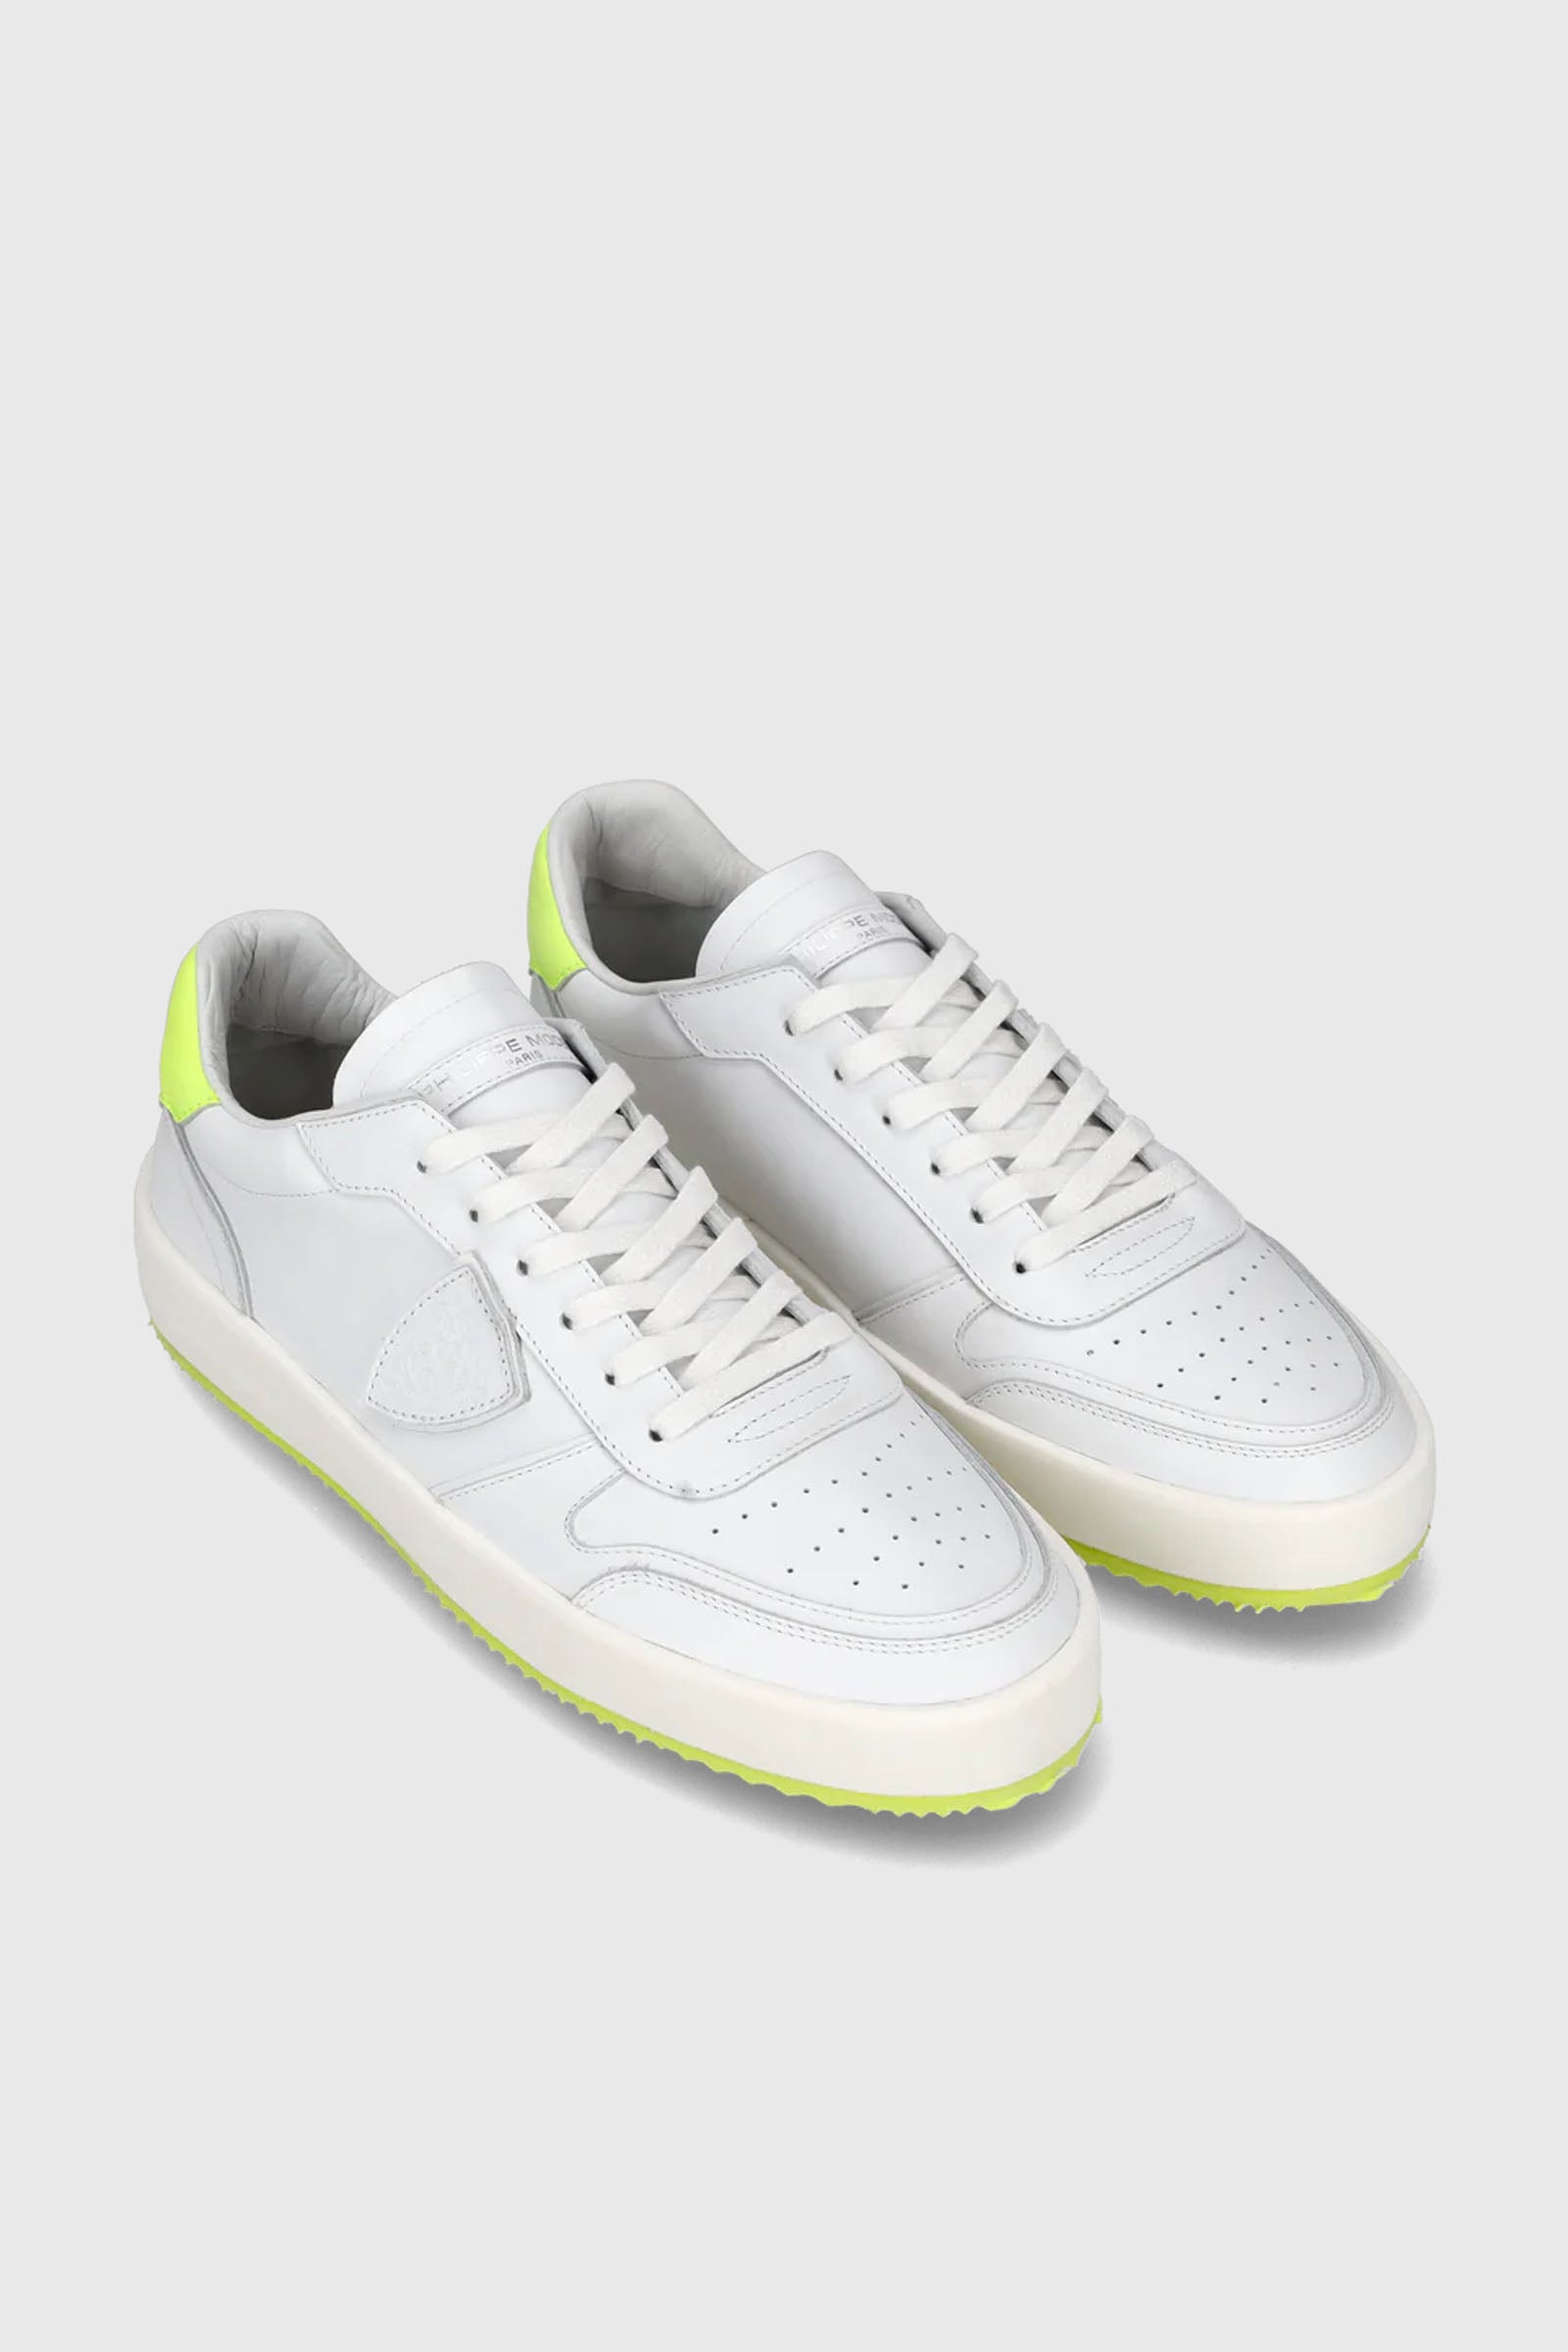 Philippe Model Sneaker Nice Veau Leather White/Yellow Fluo - 2